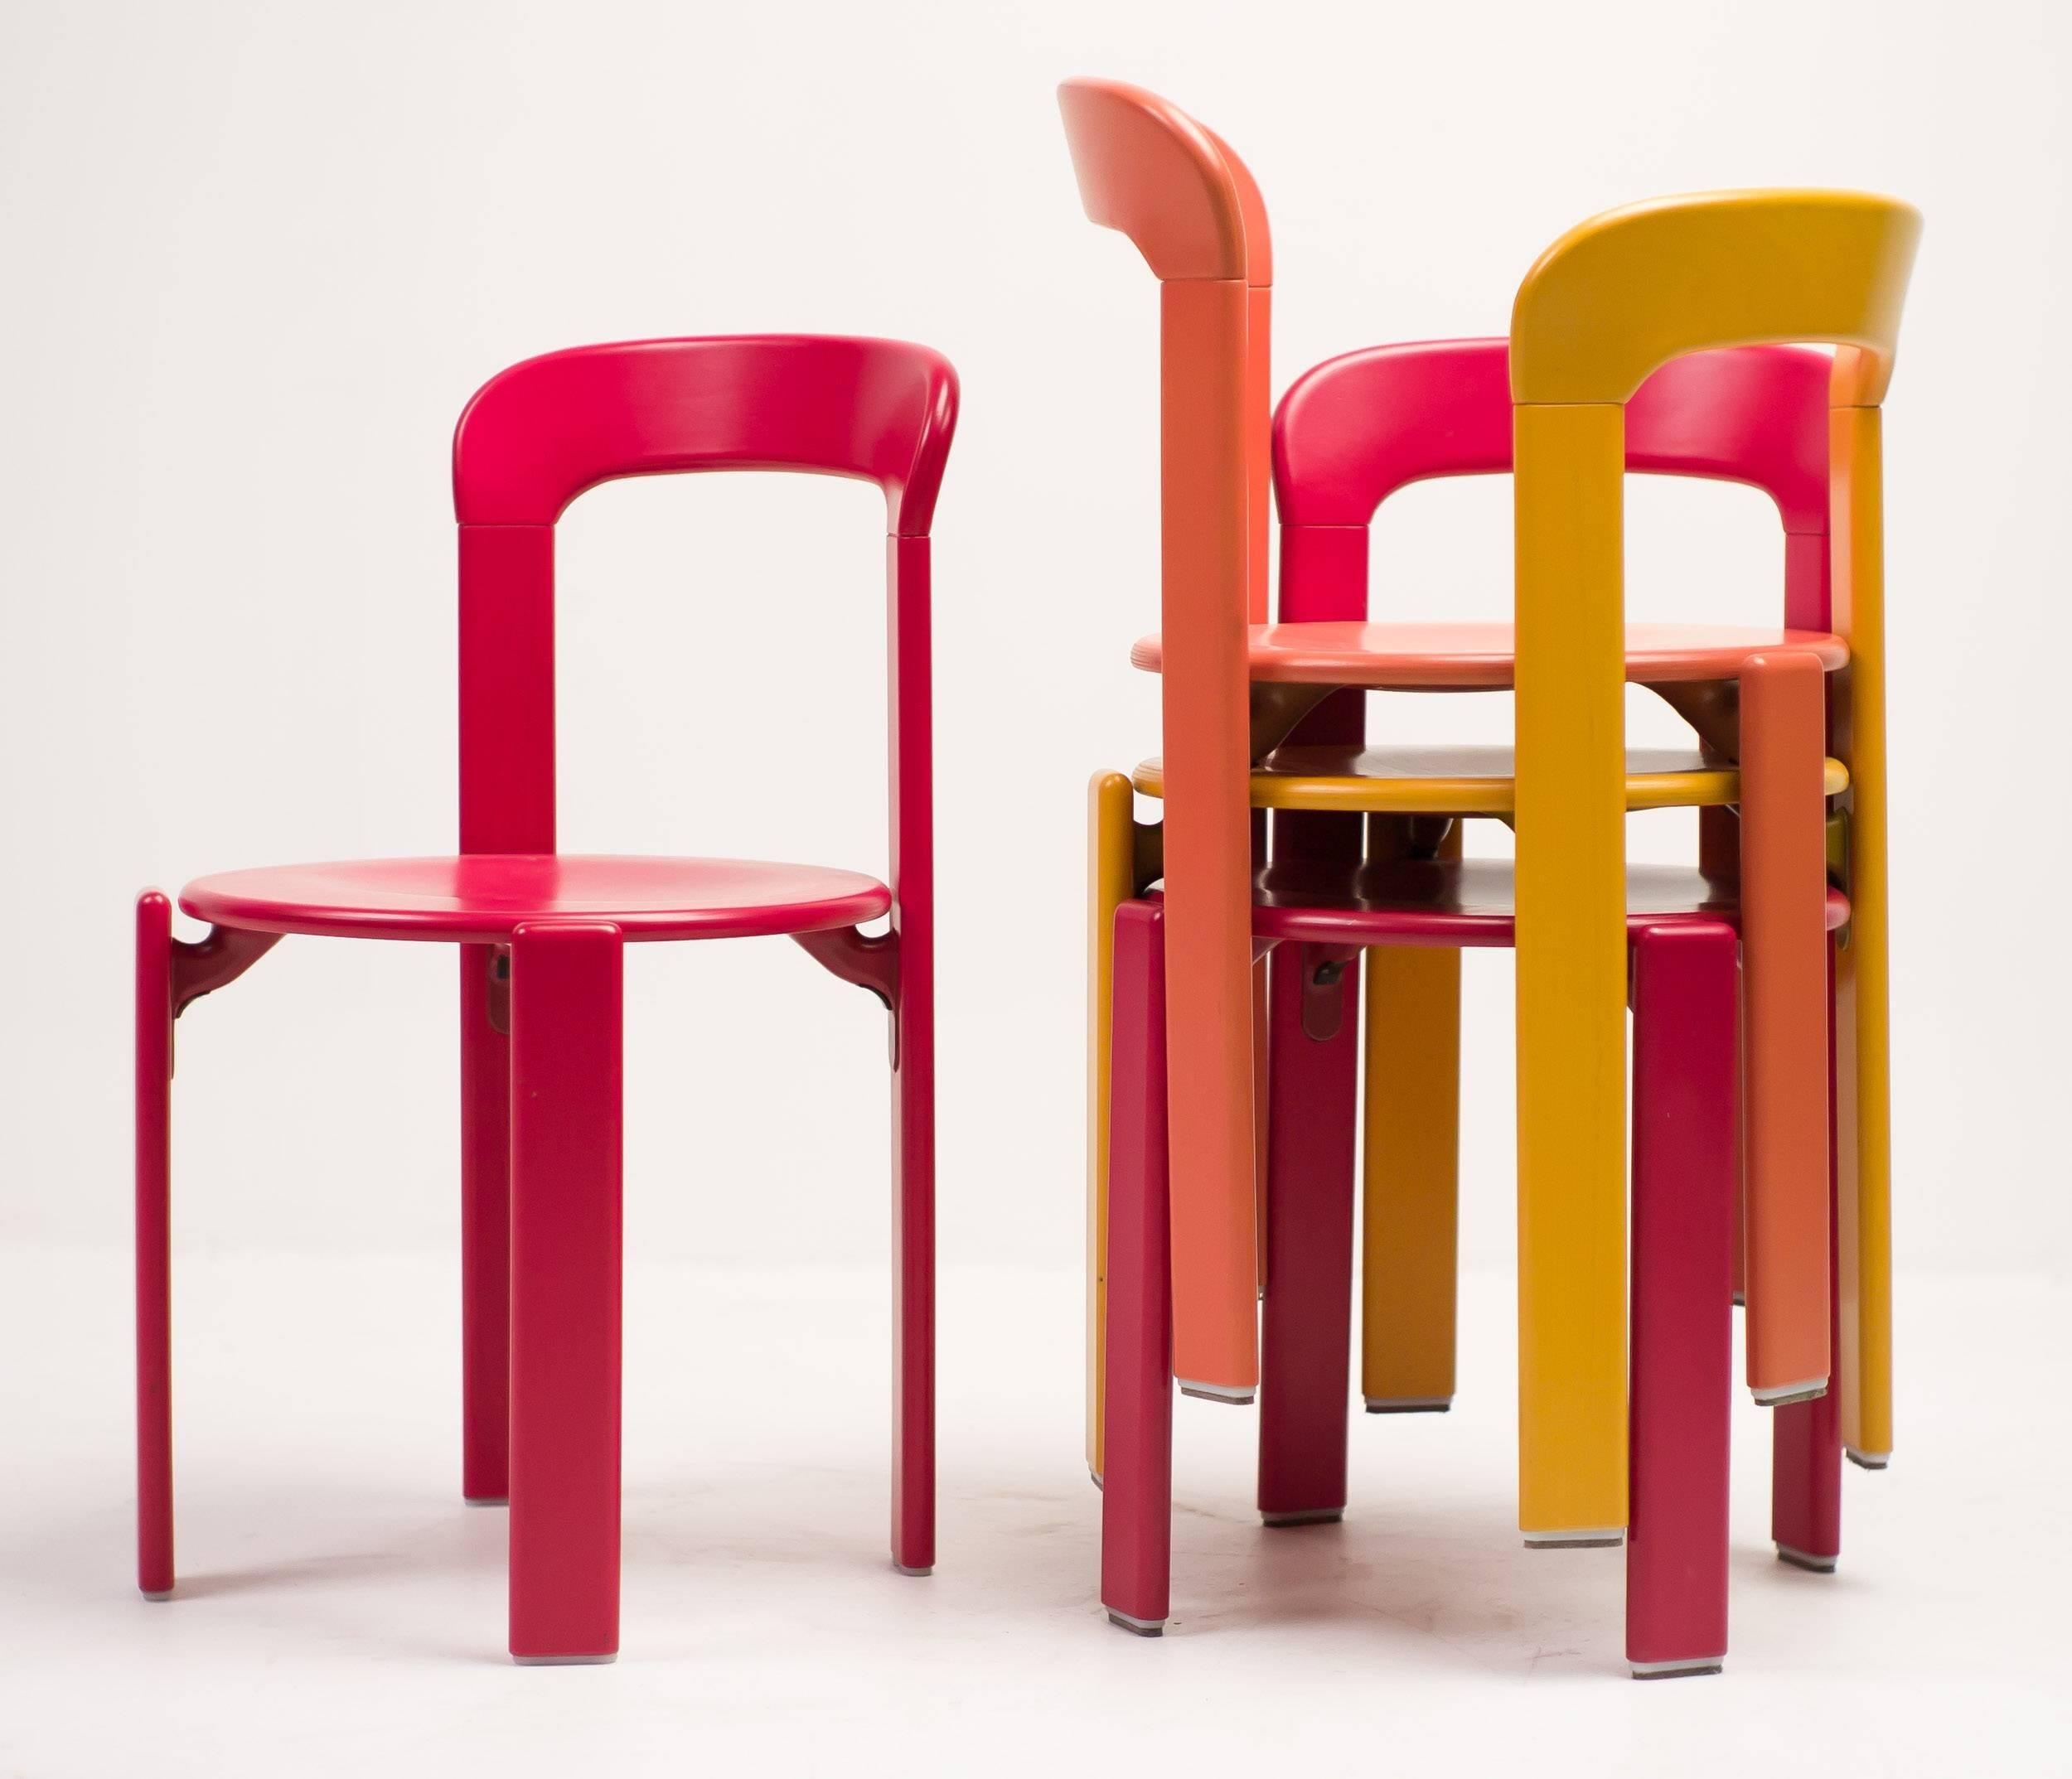 Set of Rey chairs designed by Bruno Rey for Dieteker Swiss.
Stackable, lacquered in different colors.
 

 